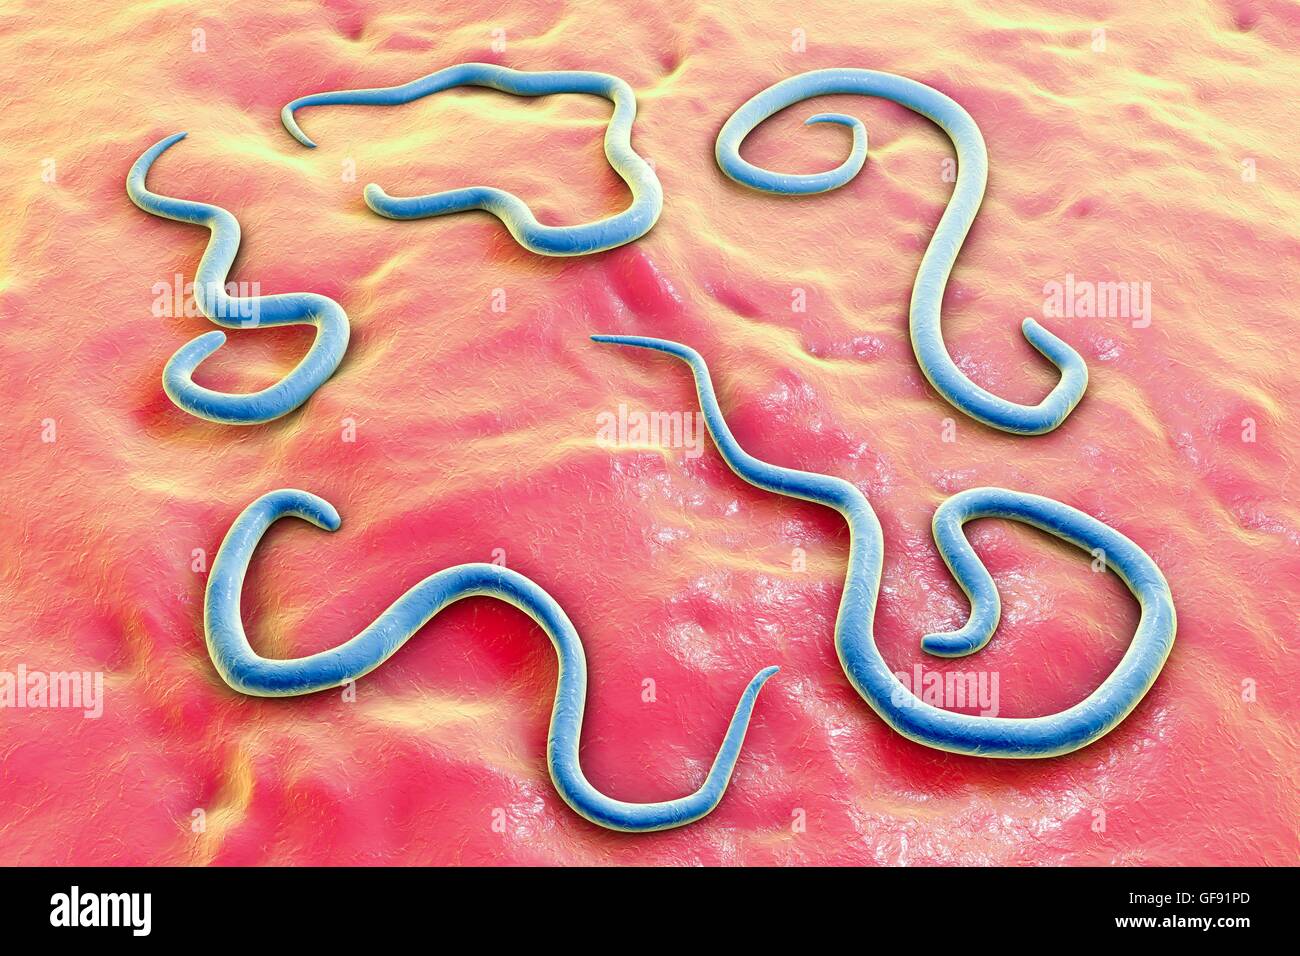 Dog roundworm (Toxocara canis), computer illustration. This is a dog parasite whose eggs are found in dog faeces. Humans, often children, can become infected with the eggs (which is known as toxocariasis) when coming into contact with an infested dog or c Stock Photo